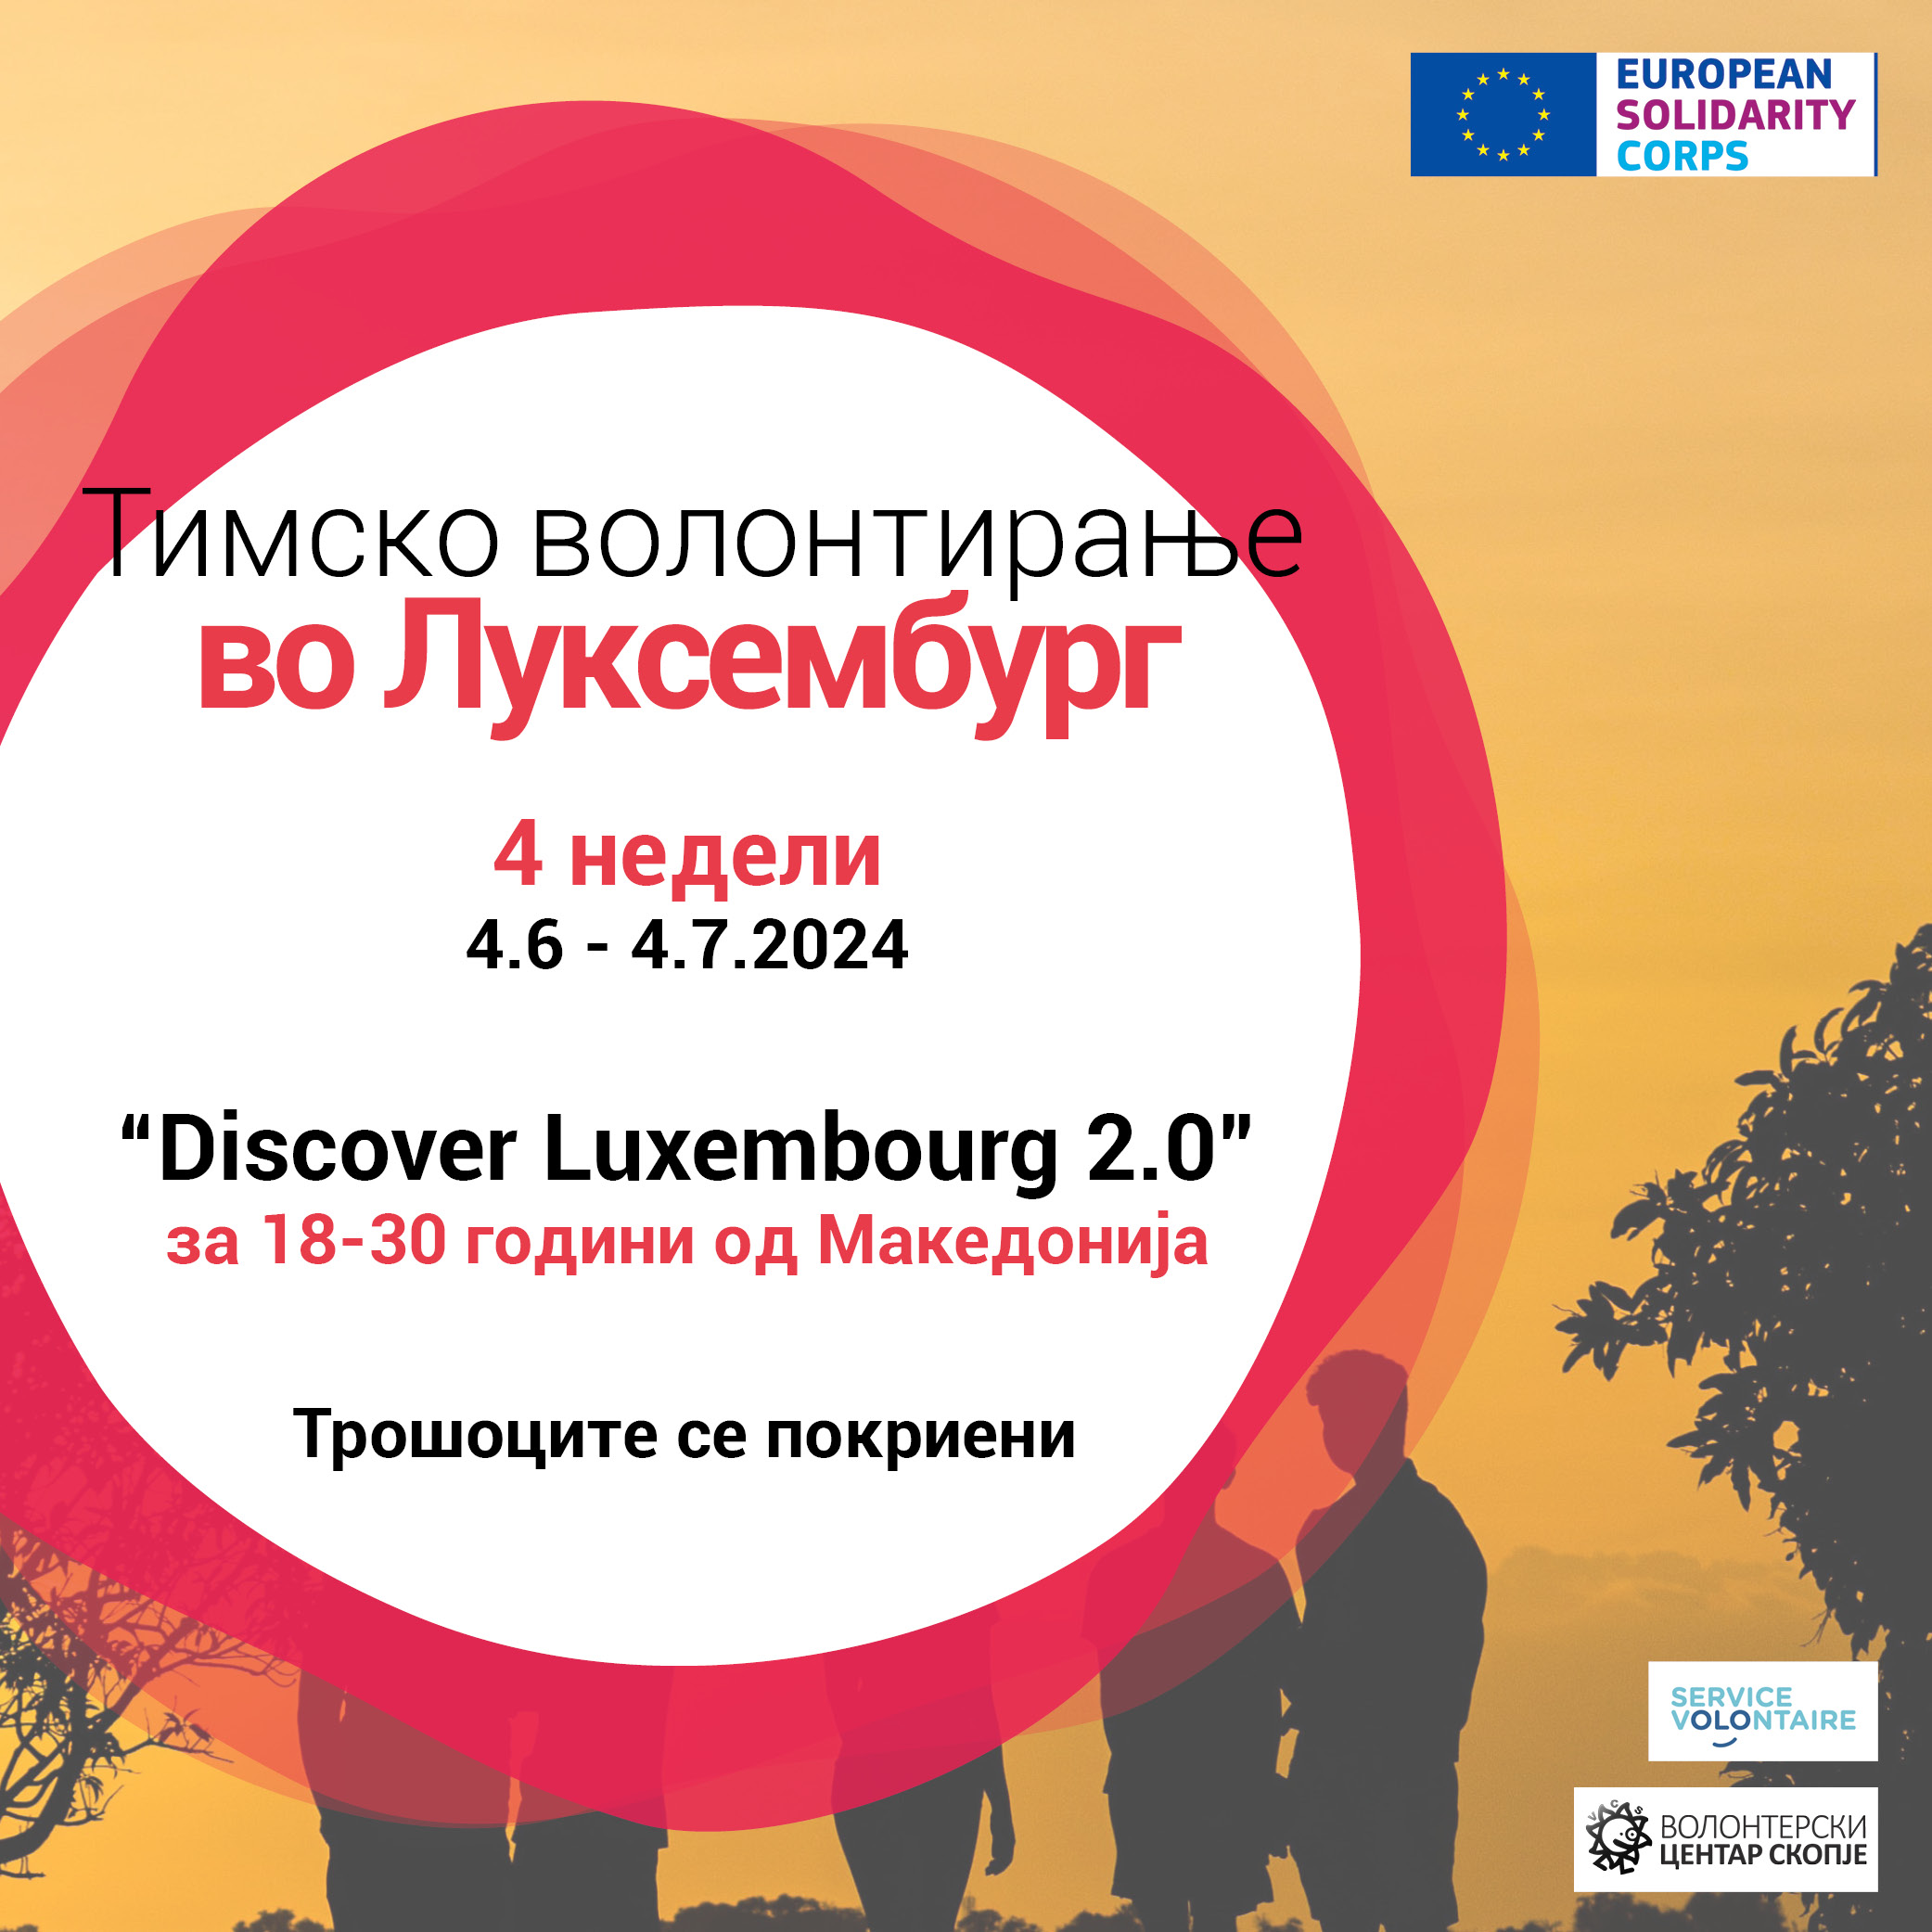 You are currently viewing Call for volunteers in Luxembourg!